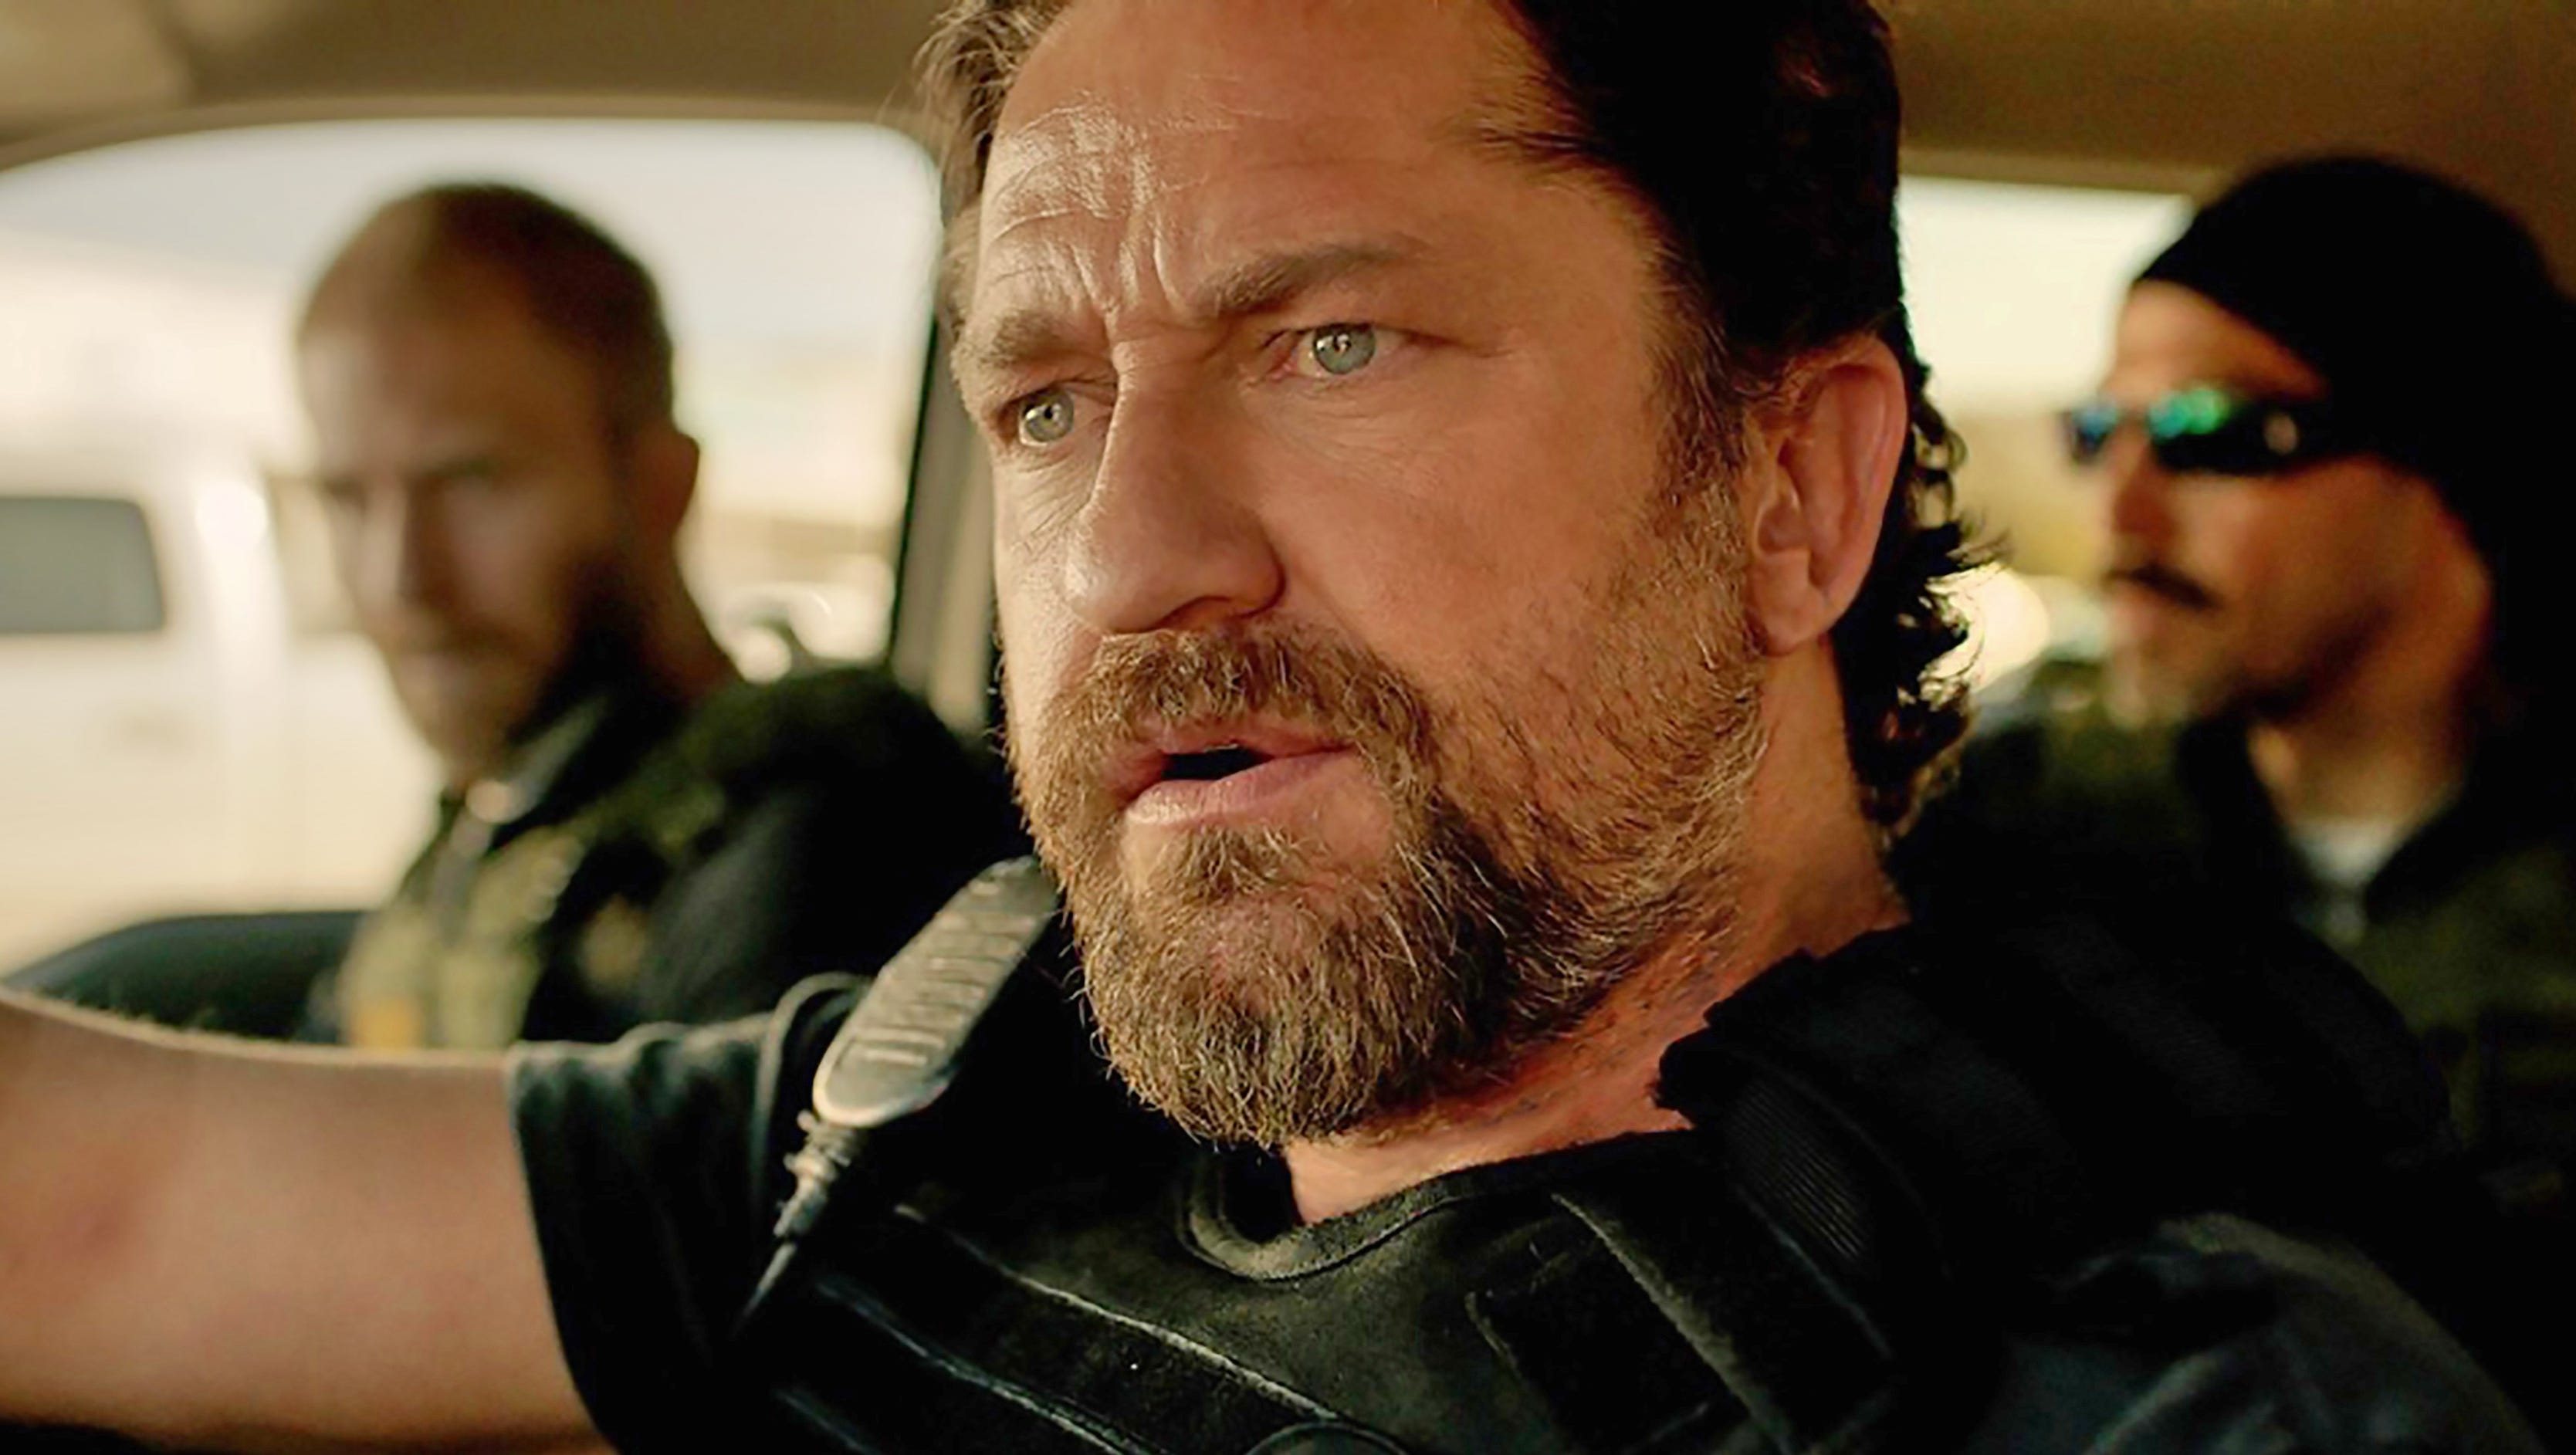 Best Action Movies On Netflix Den Of Thieves